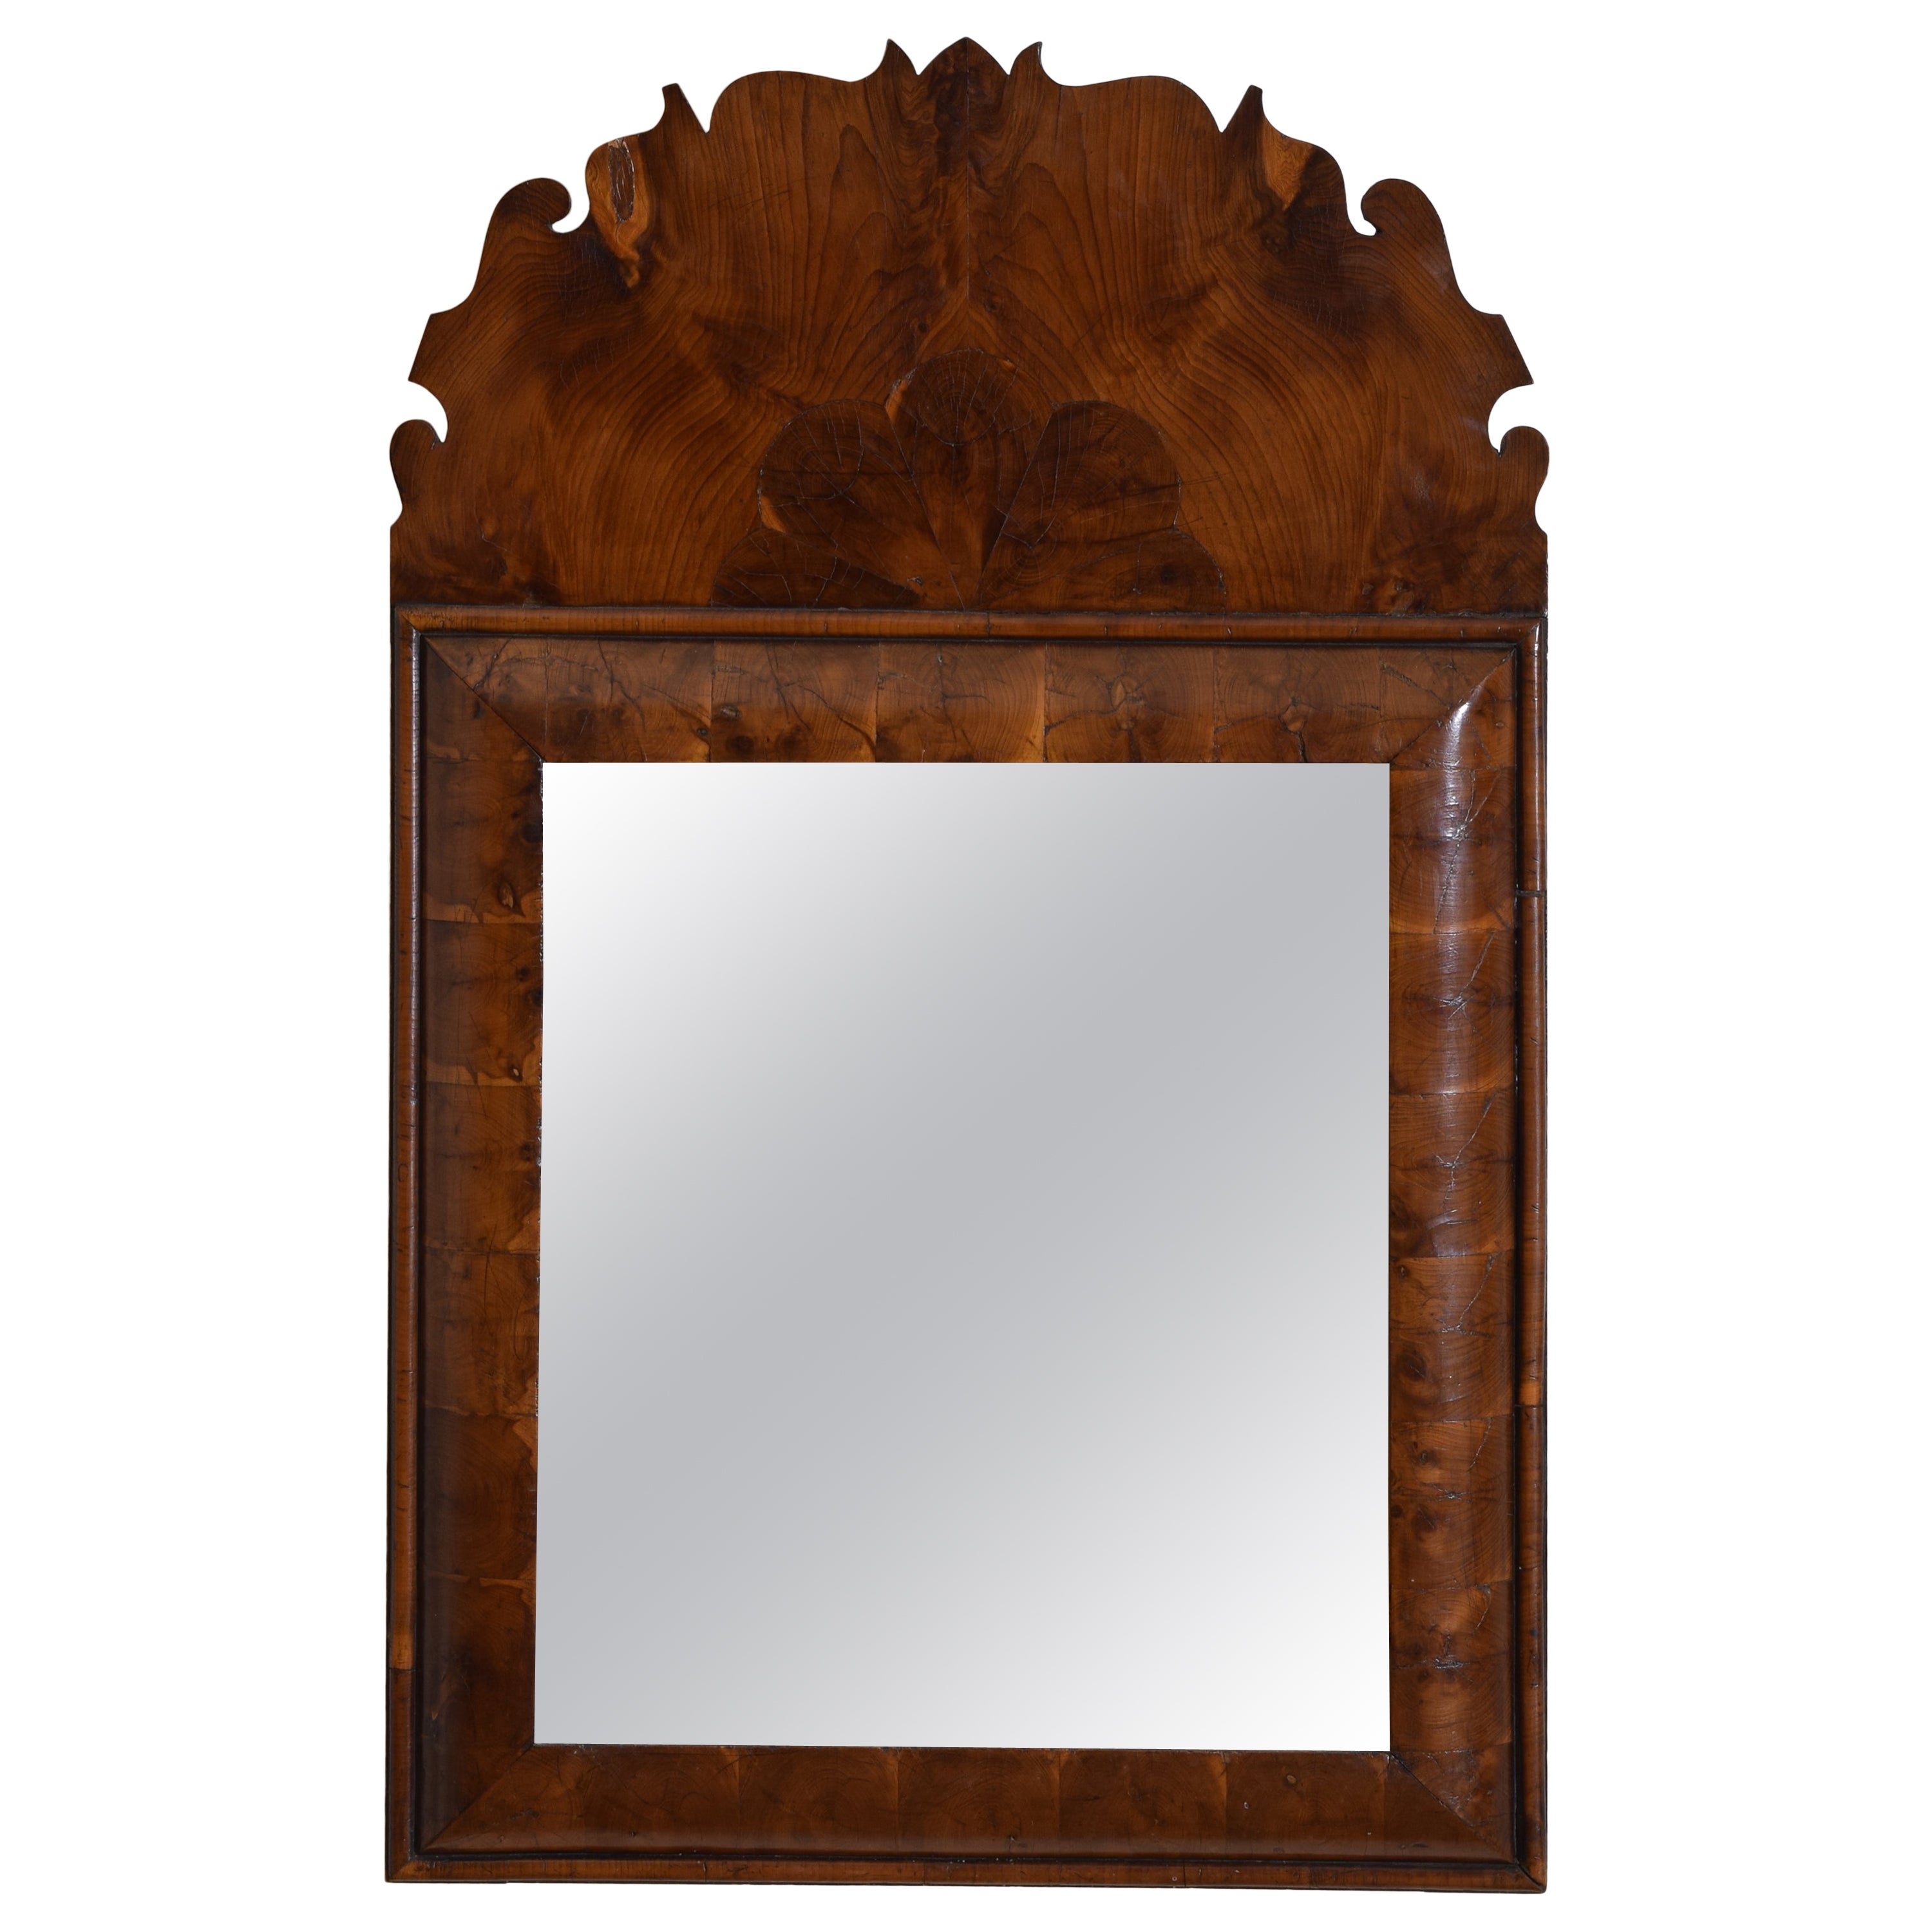 English William and Mary Style Oyster Walnut Mirror, mid 19th century For Sale